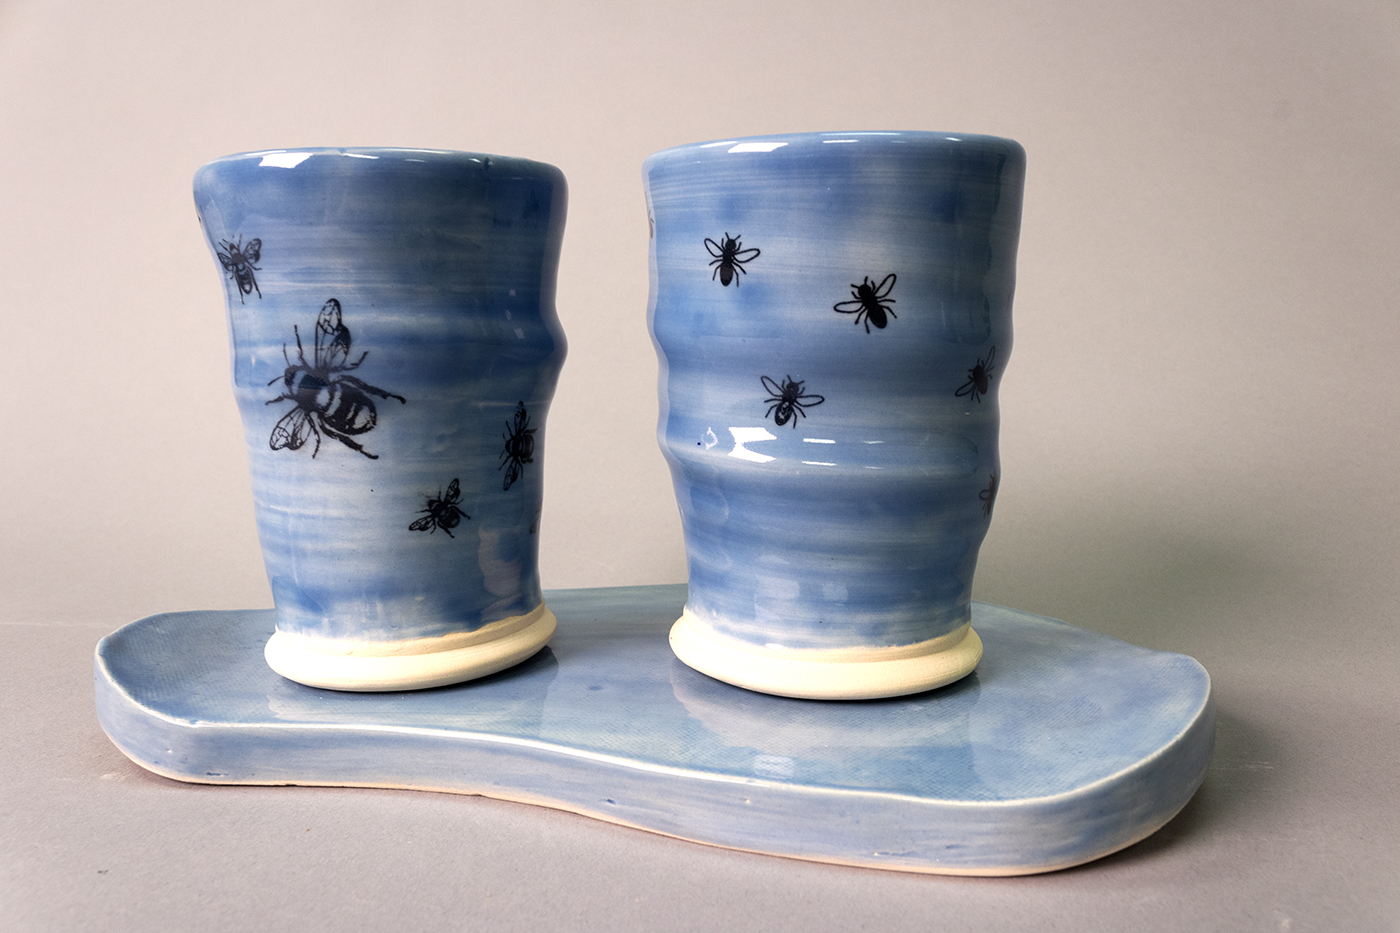 Two blue cups with images of flies and bees sitting a coordinating tray.